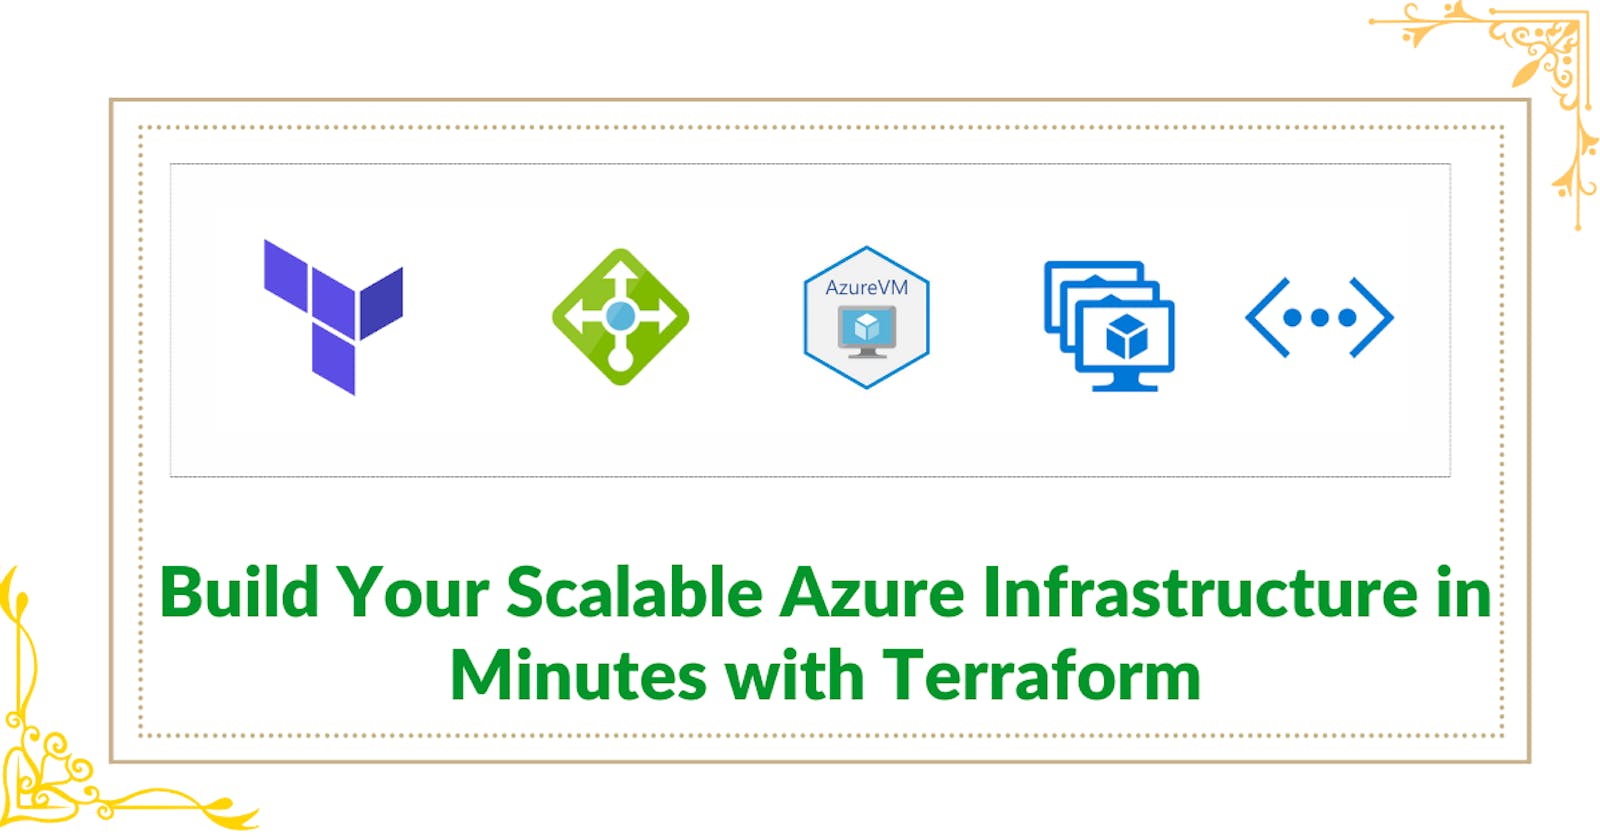 Build Your Scalable Azure Infrastructure in Minutes with Terraform